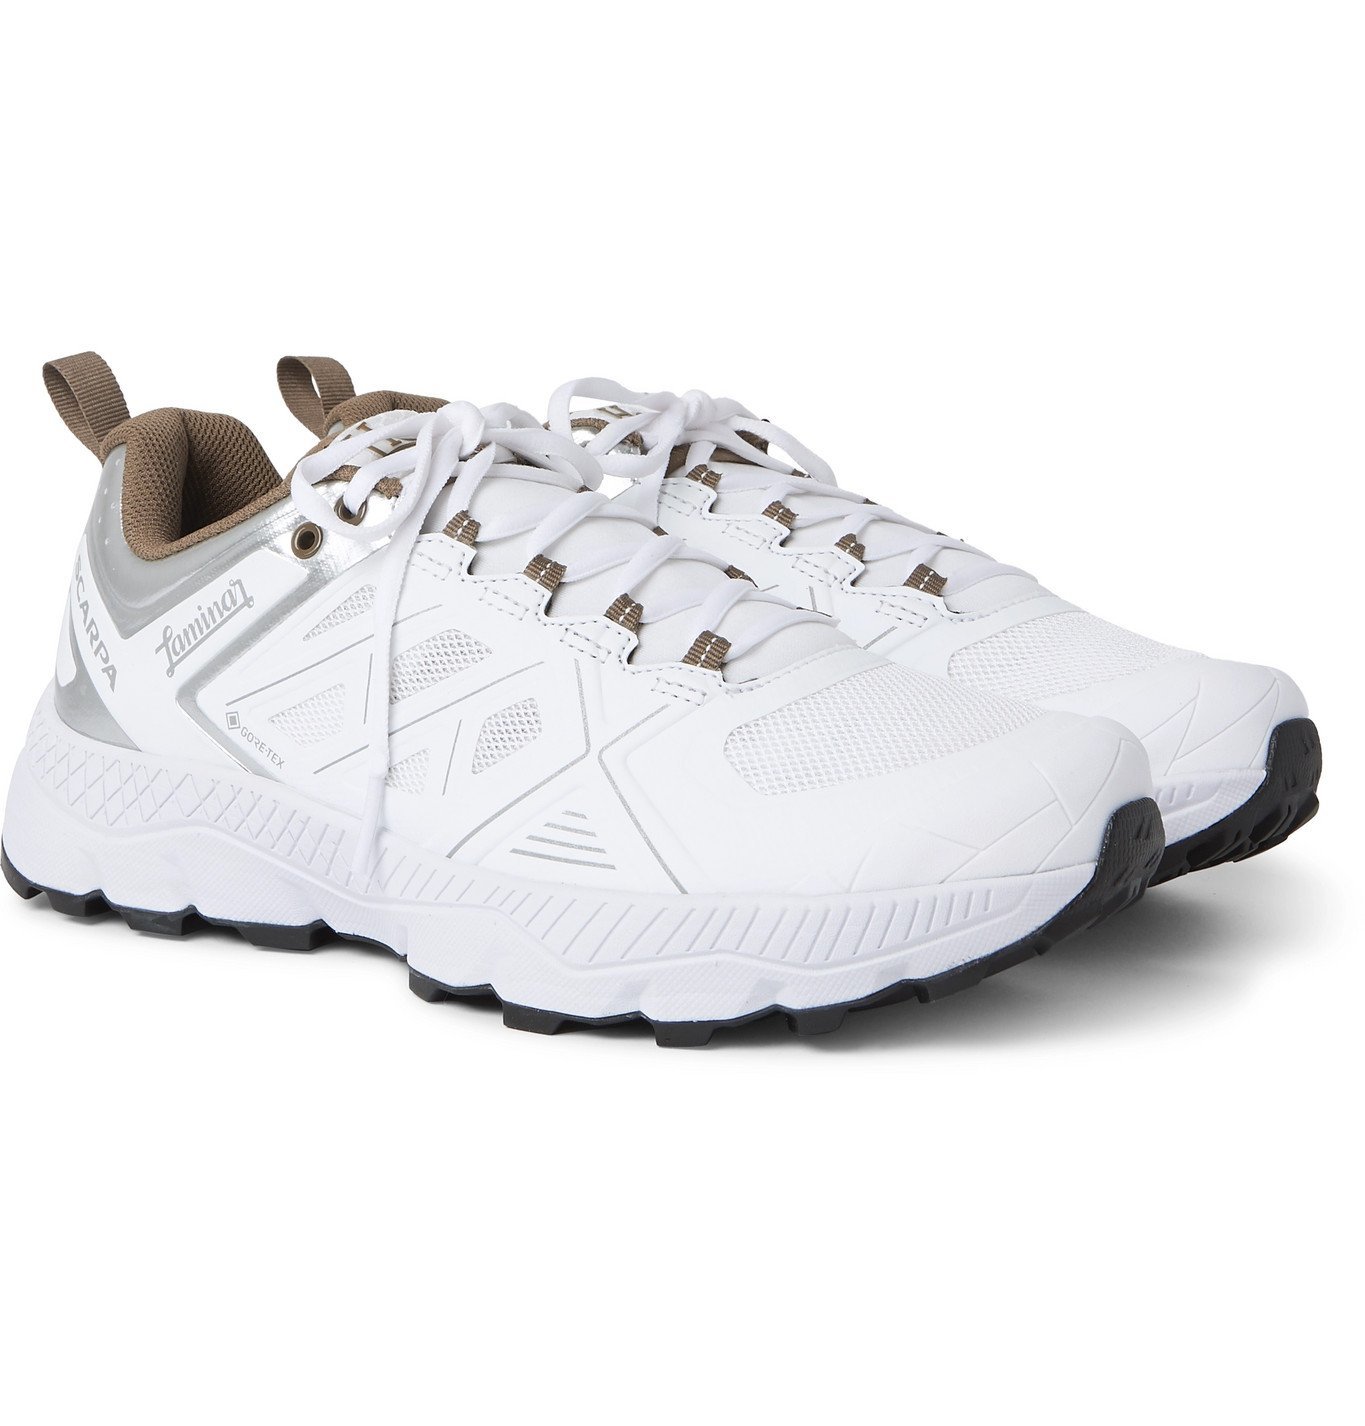 Herno Laminar - Scarpa Rubber-Trimmed Mesh Running Sneakers - White Herno